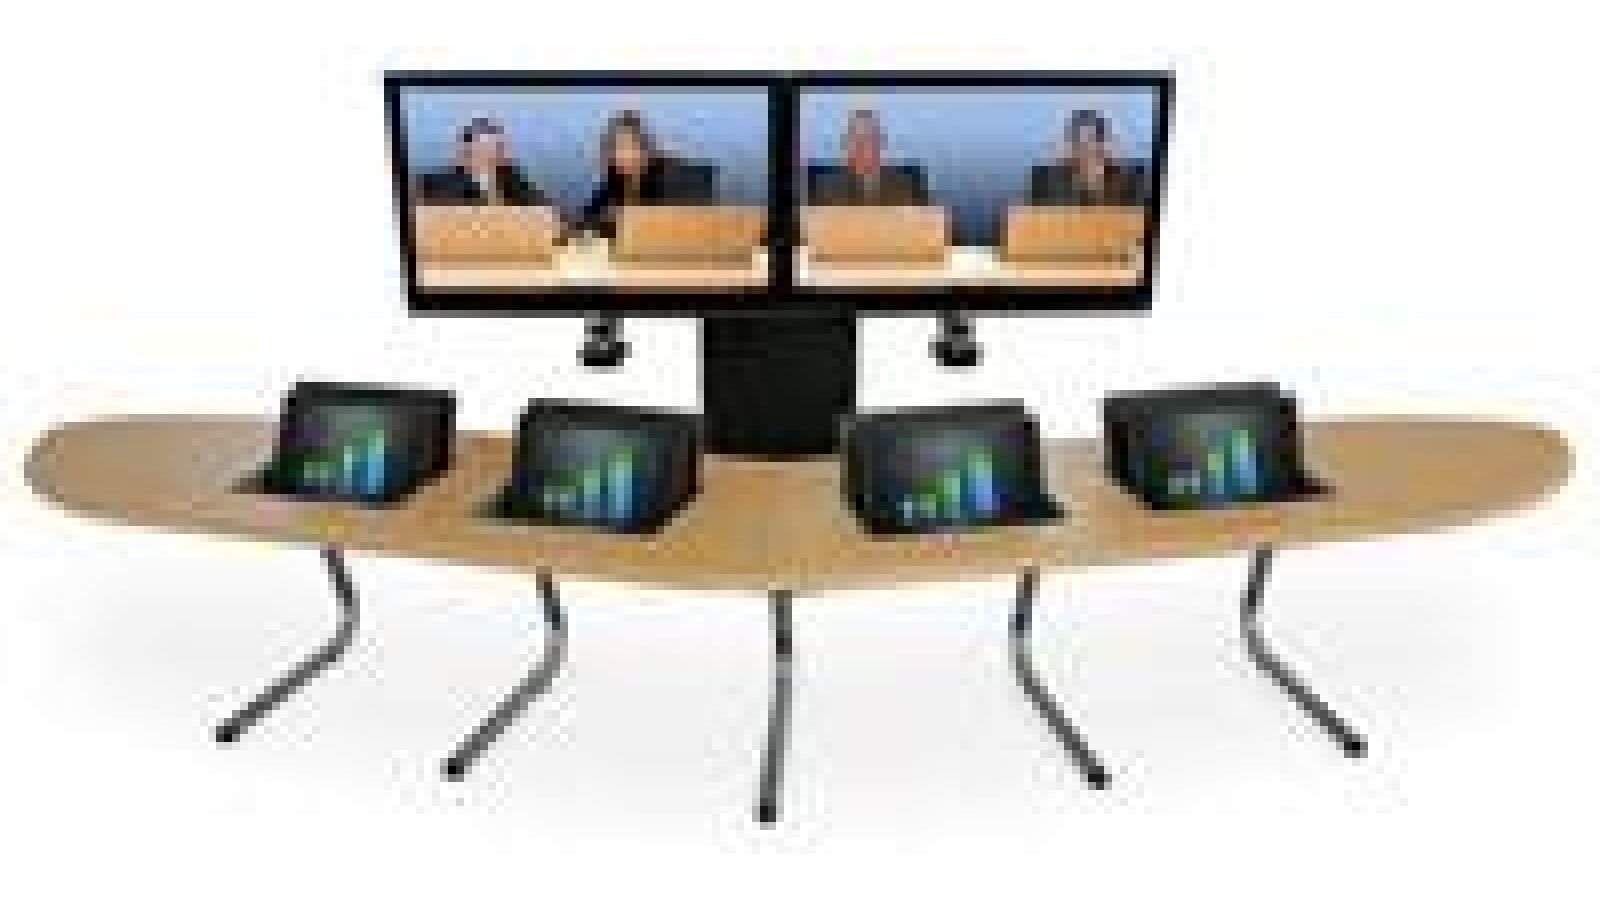 Boomerang Teleconference Tables